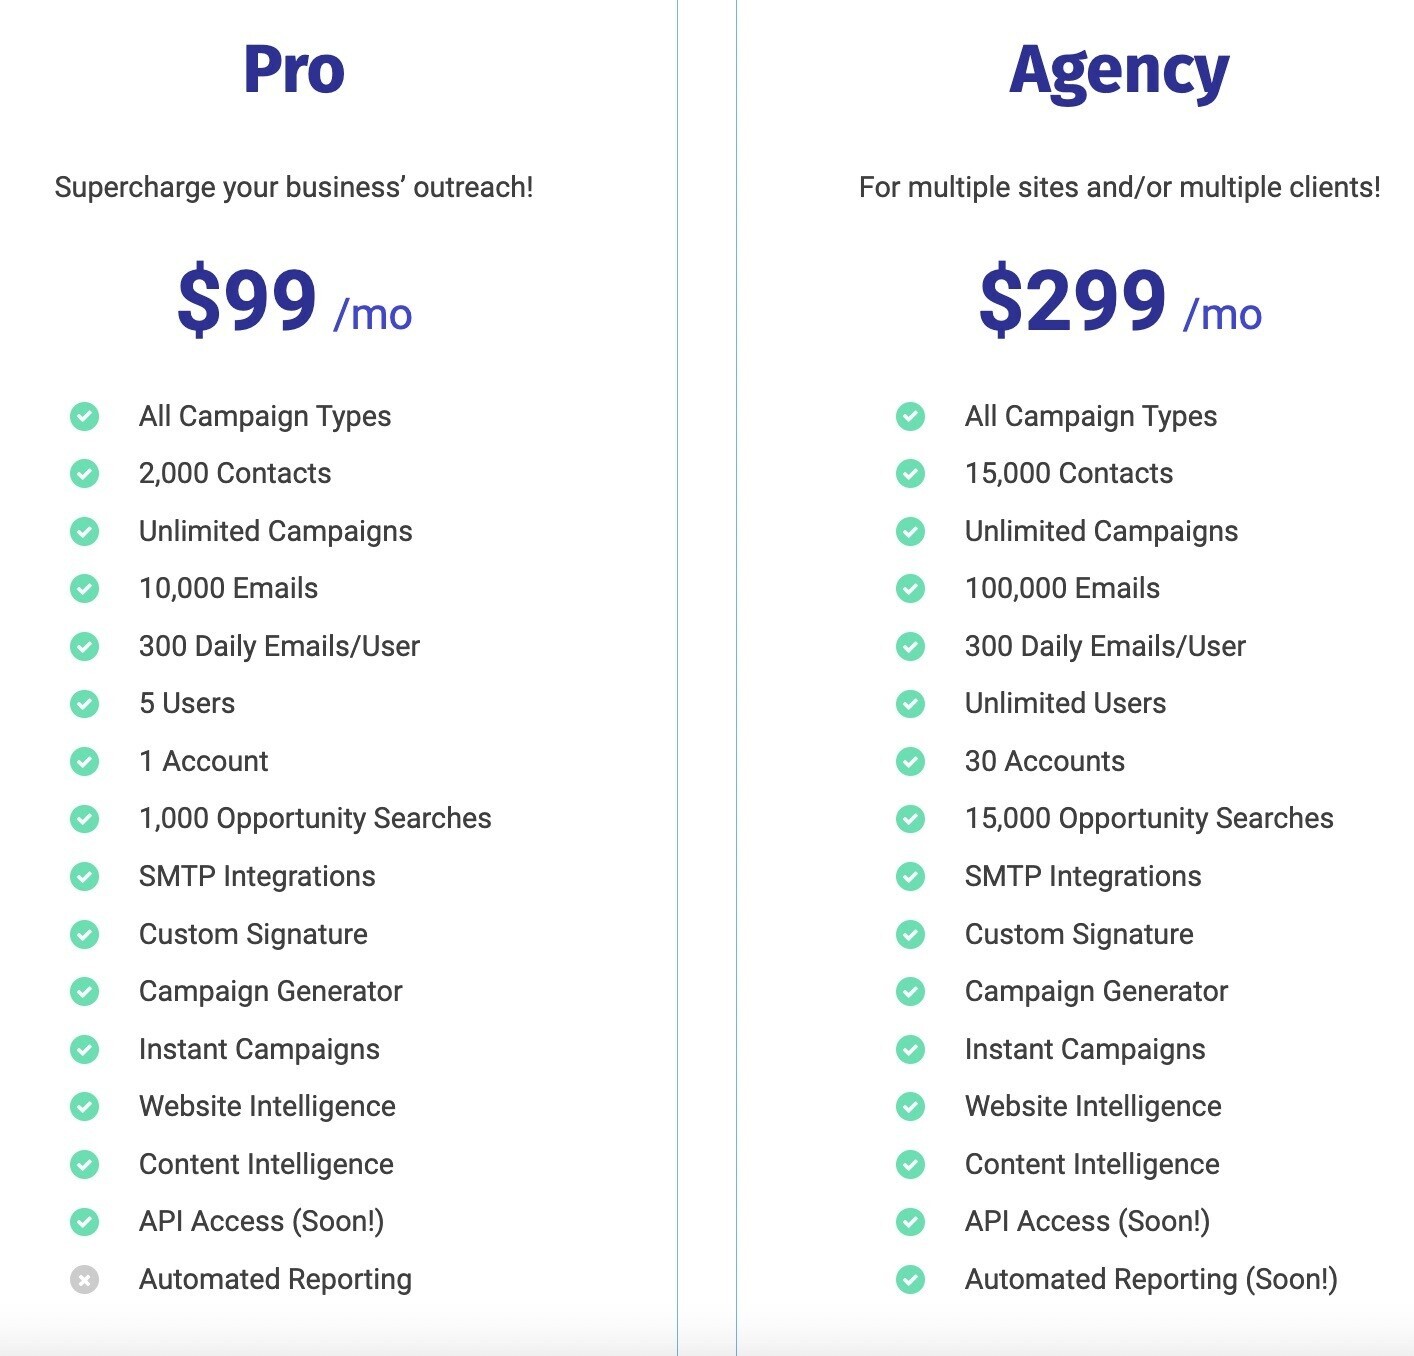 Postaga’s pricing page showing prices and features for Pro and Agency plans